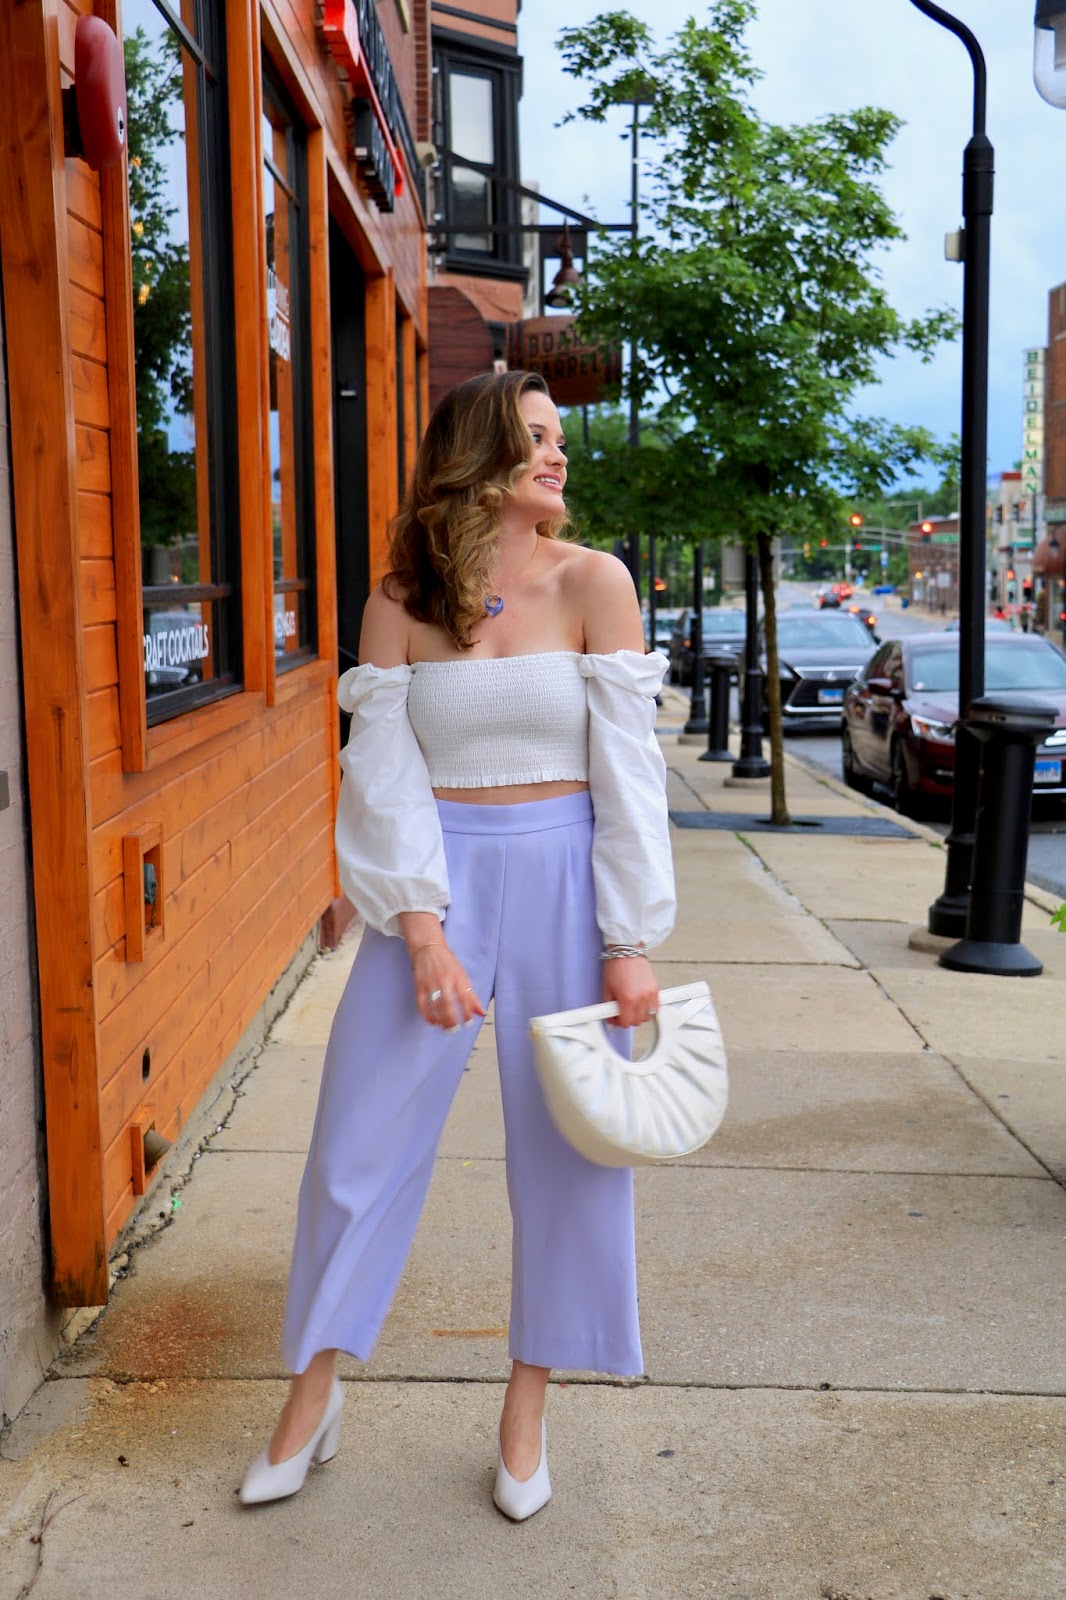 3 Simple Ways to Wear High‐Waisted Pants - wikiHow Life